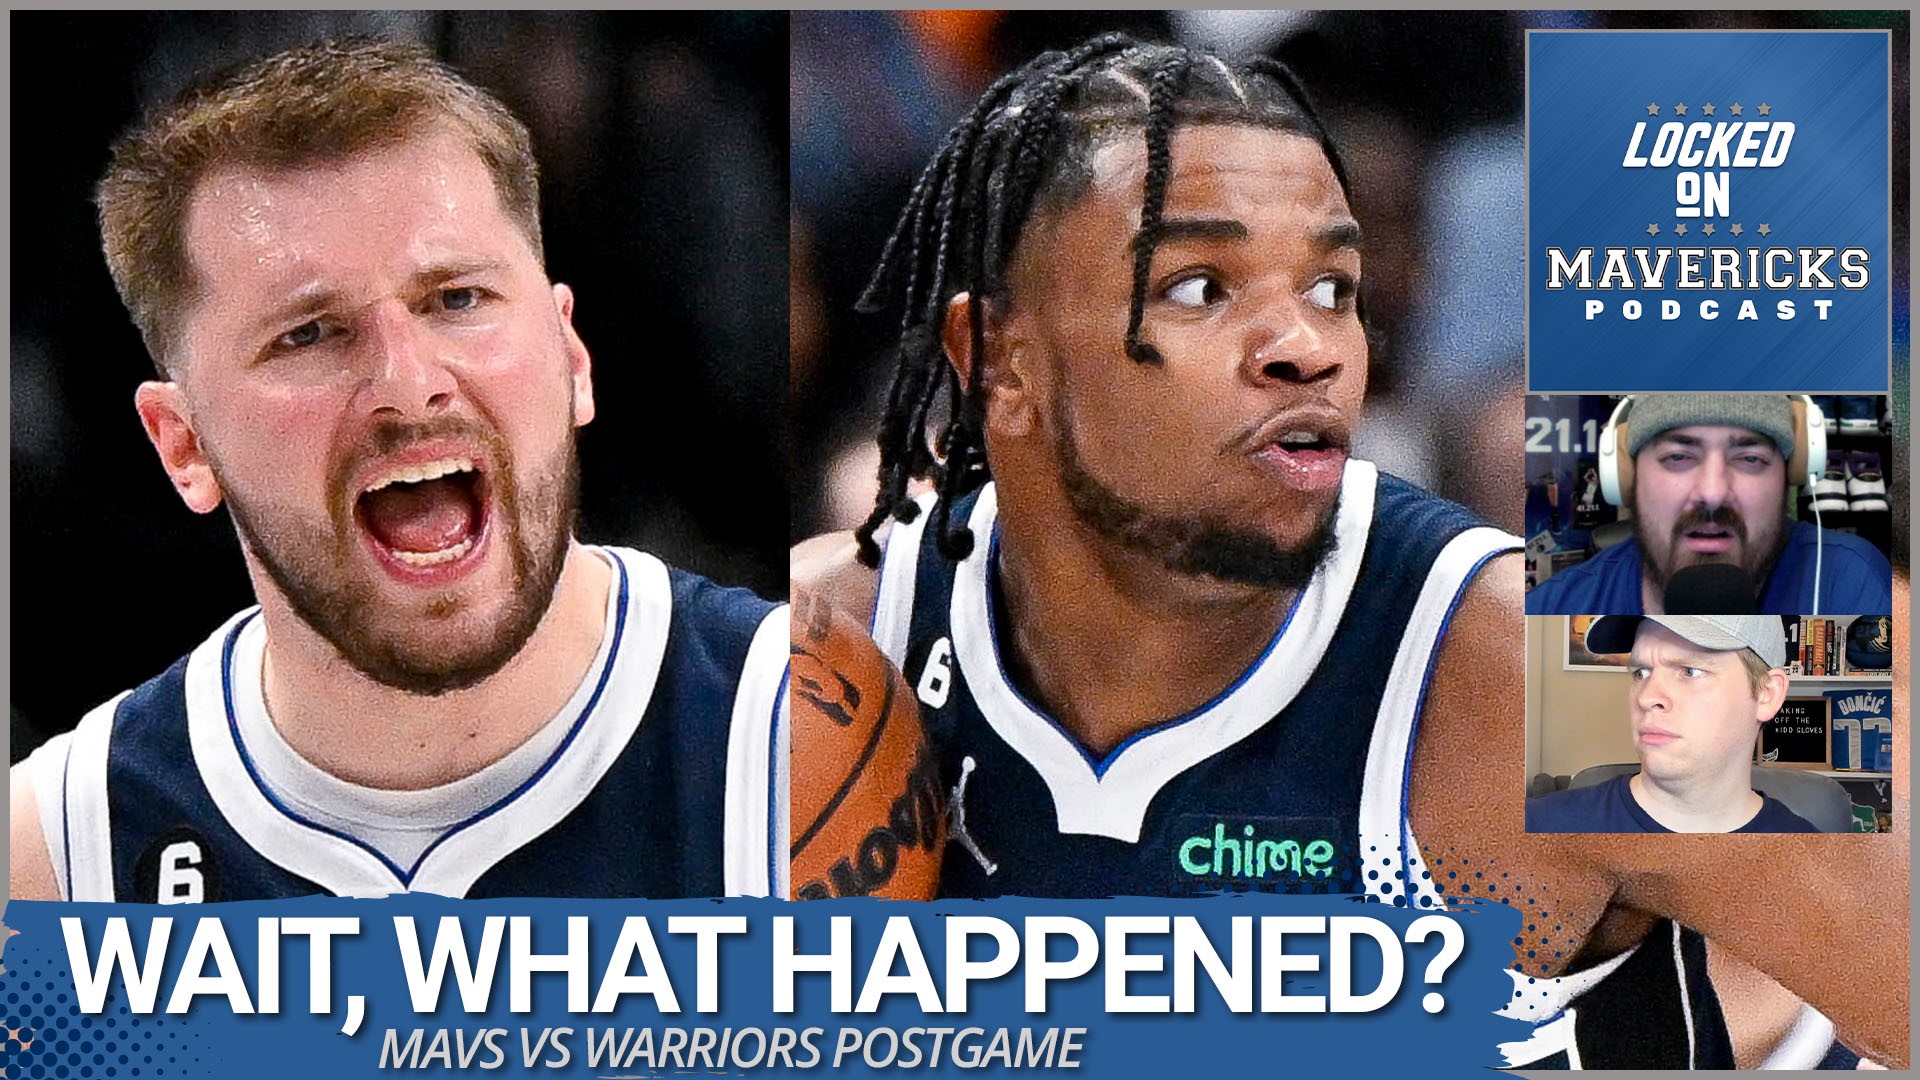 Nick Angstadt & Isaac Harris breakdown the Mavs loss to the Warriors. How did Luka Doncic look in his return? Why is Mark Cuban protesting a call?